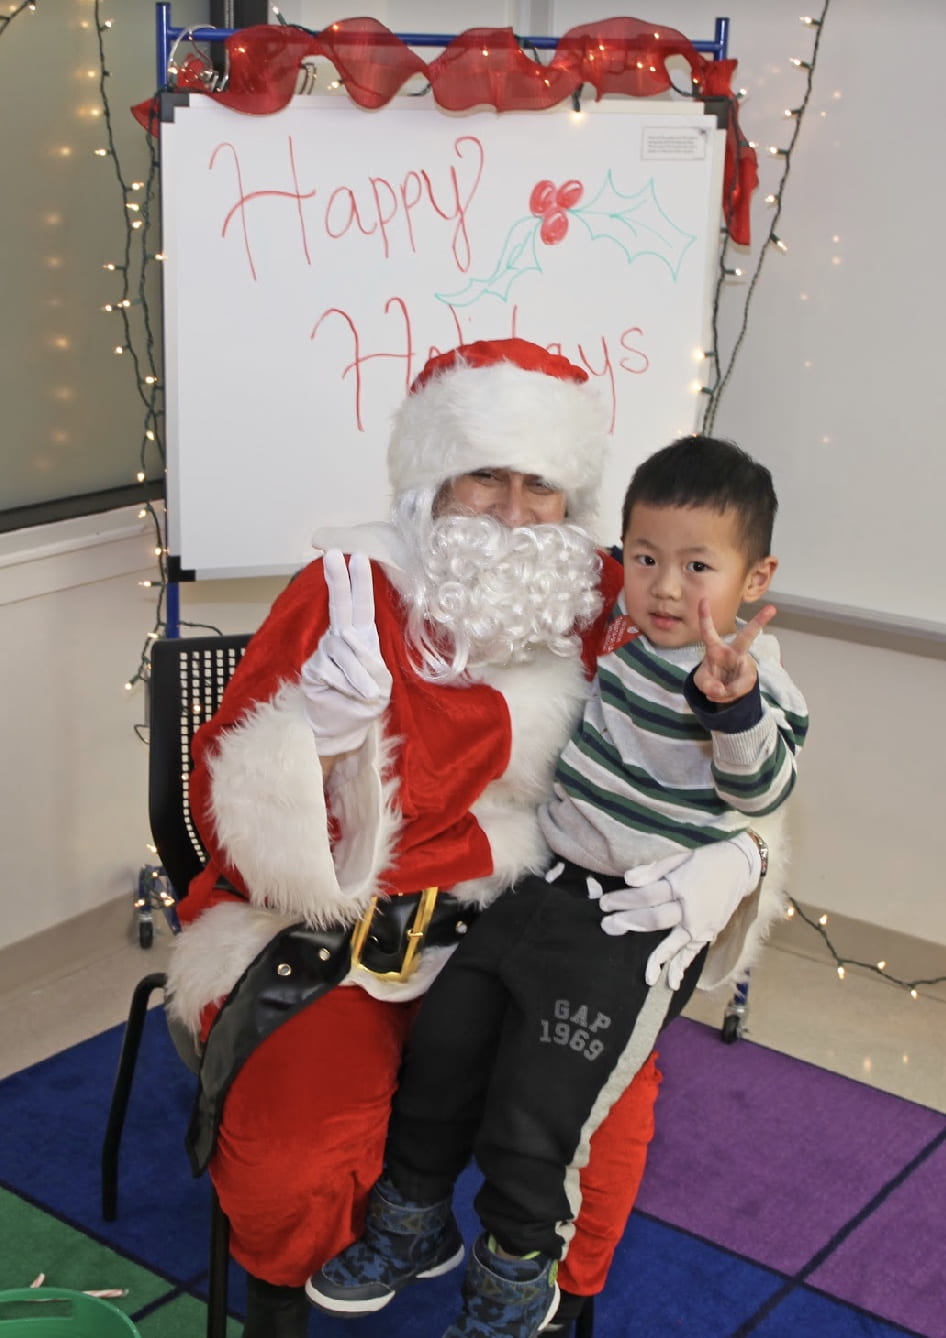 Student and Santa Claus making a peace sign with their fingers.